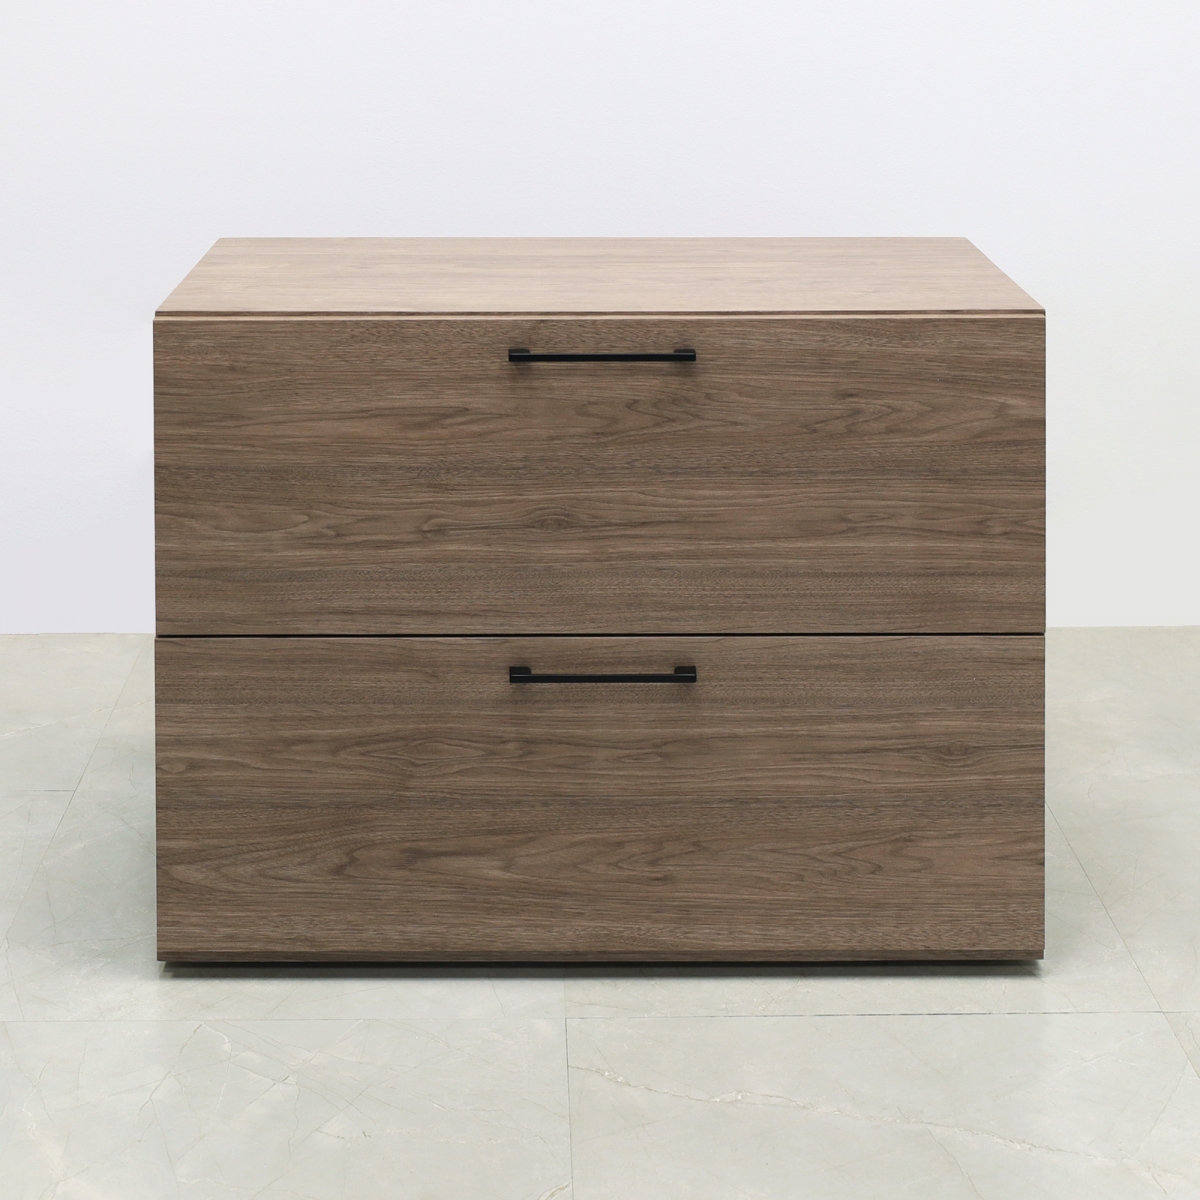 Naples Lateral File Cabinet in Walnut Heights Matte Laminate - 36 In. - Stock #14